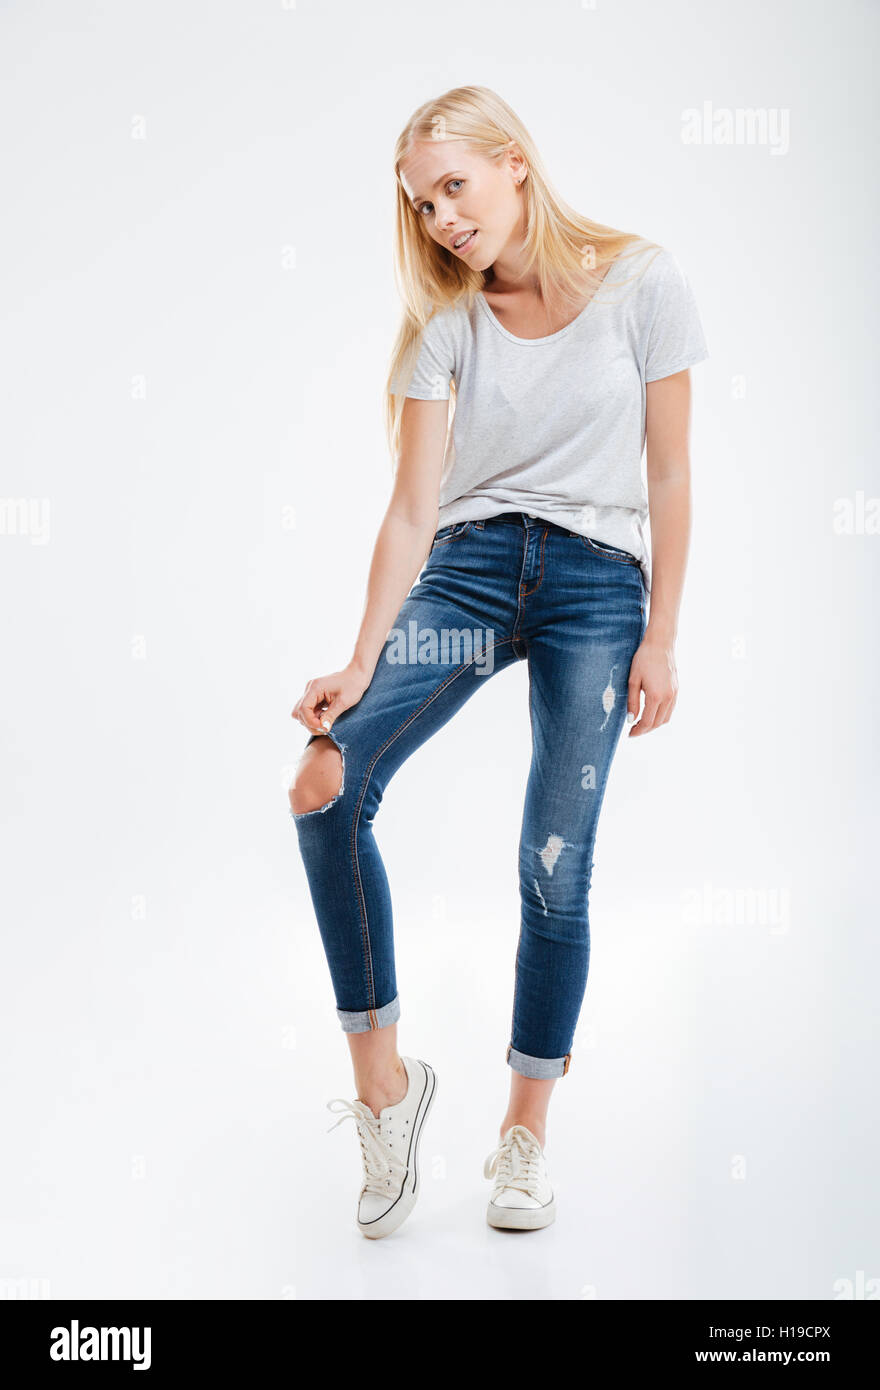 Ripped Pants High Resolution Stock Photography and Images - Alamy